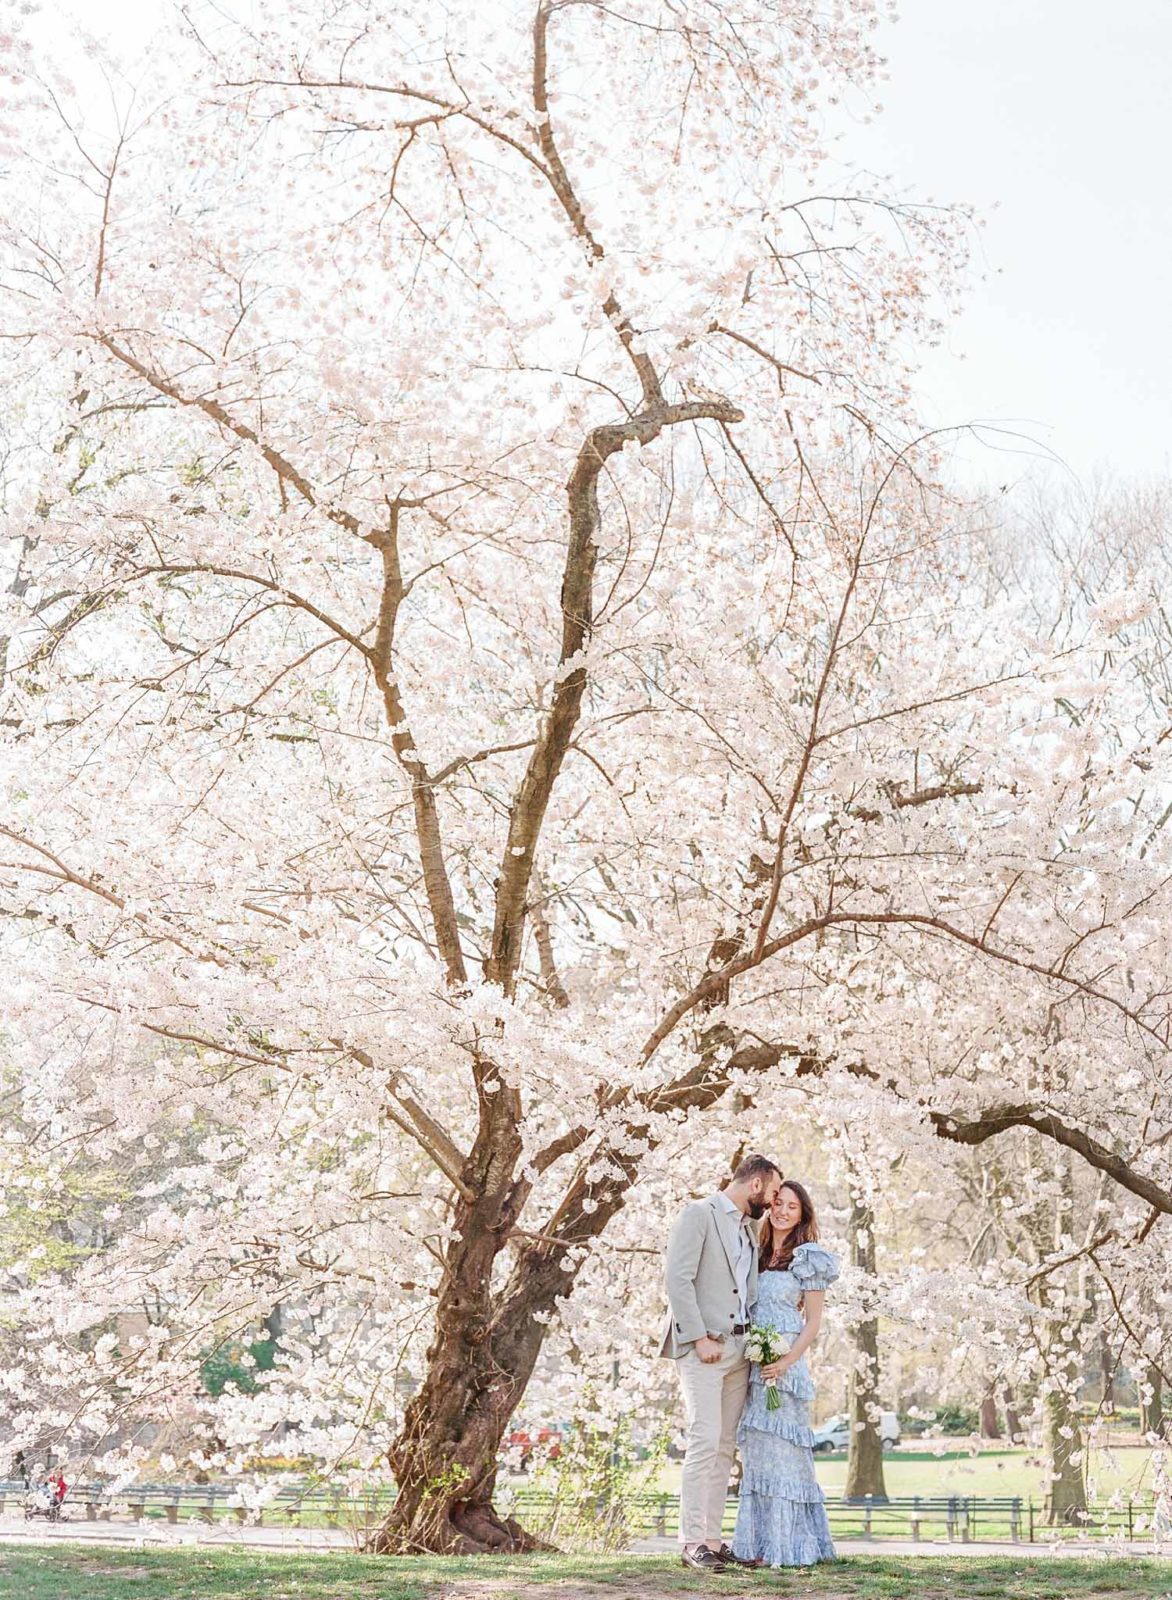 New-York-Film-Photographer-NYC-Luxury-Wedding-Photos-Spring-Engagement-Session-Molly-Carr-Photography-Central-Park-Cherry-Blossoms